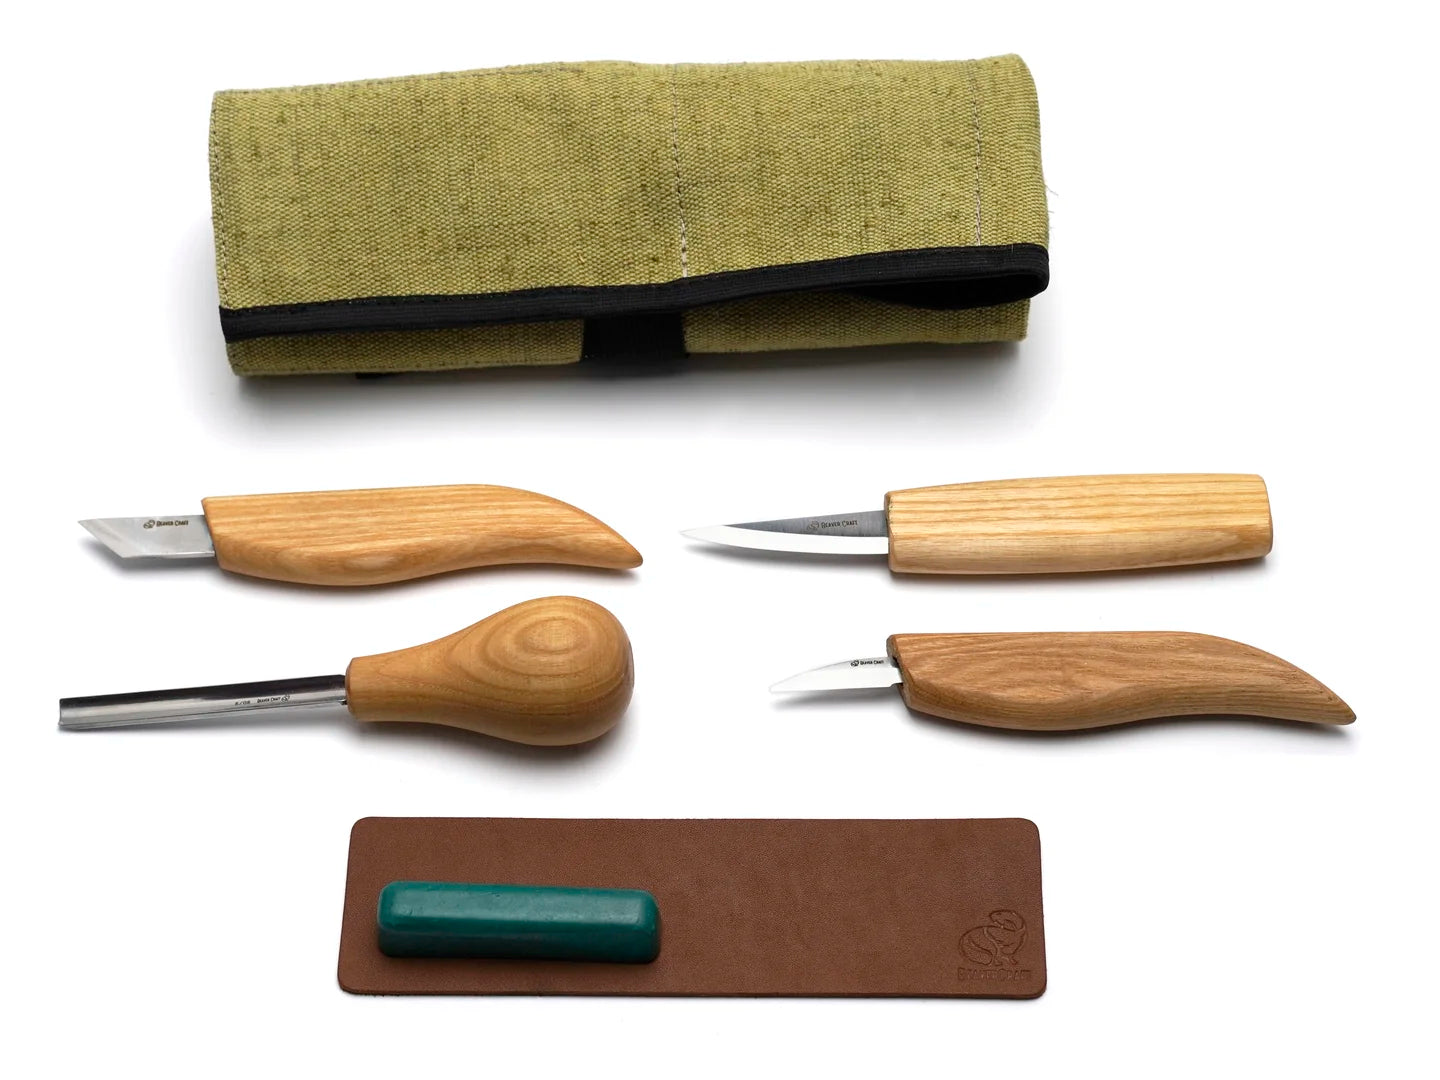 S51 - Woodcarving Set of 4 Knives